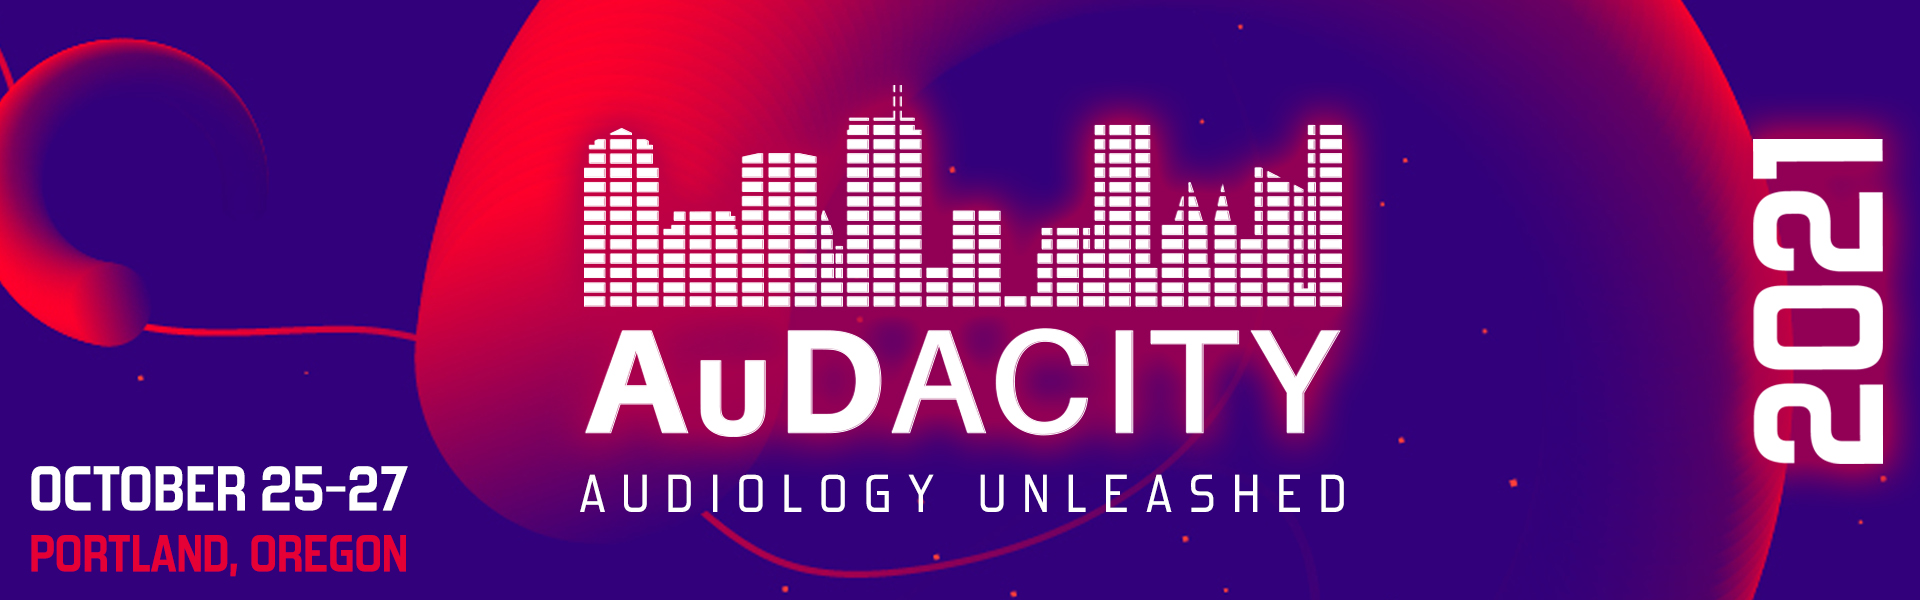 ADA Conference AuDacity 2021 Audiology Unleashed Cochlear ProNews